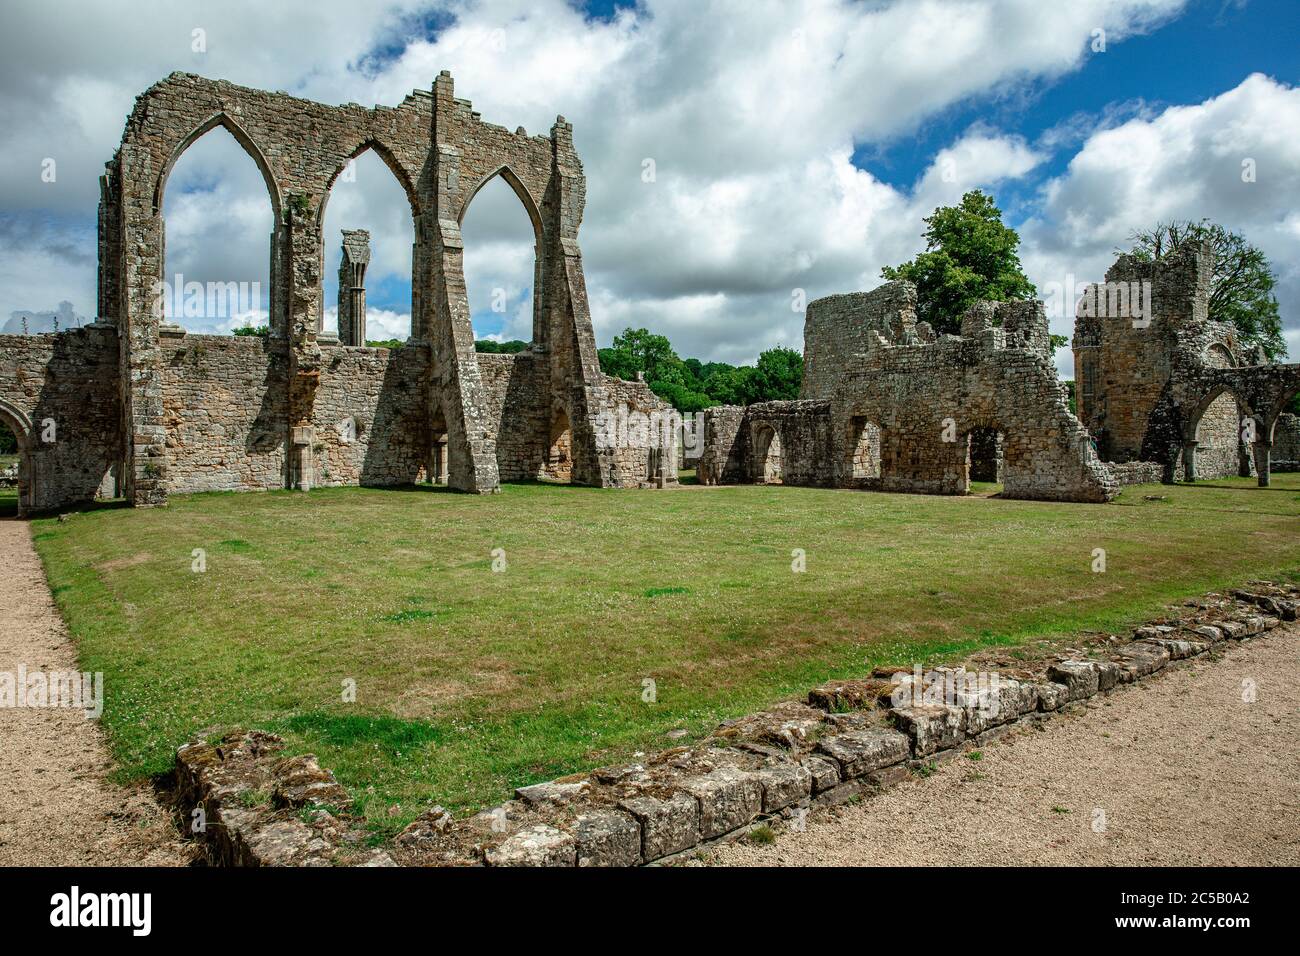 Ruins of Bayham Abbey, East Sussex, England, UK - church, chapter house and gatehouse Stock Photo